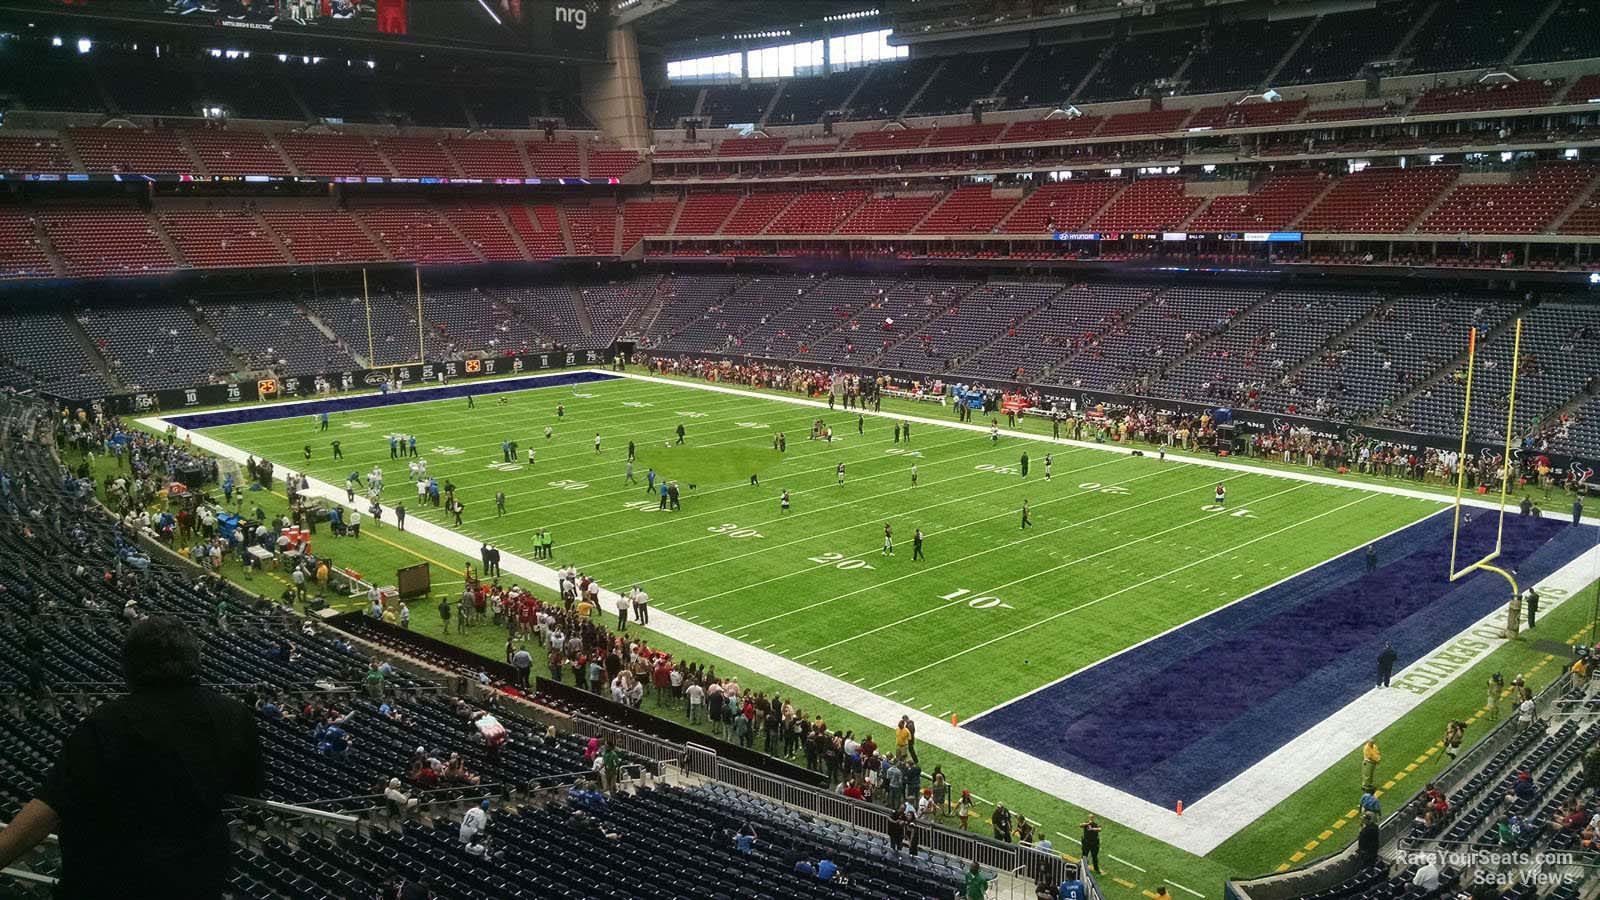 section 331, row l seat view  for football - nrg stadium